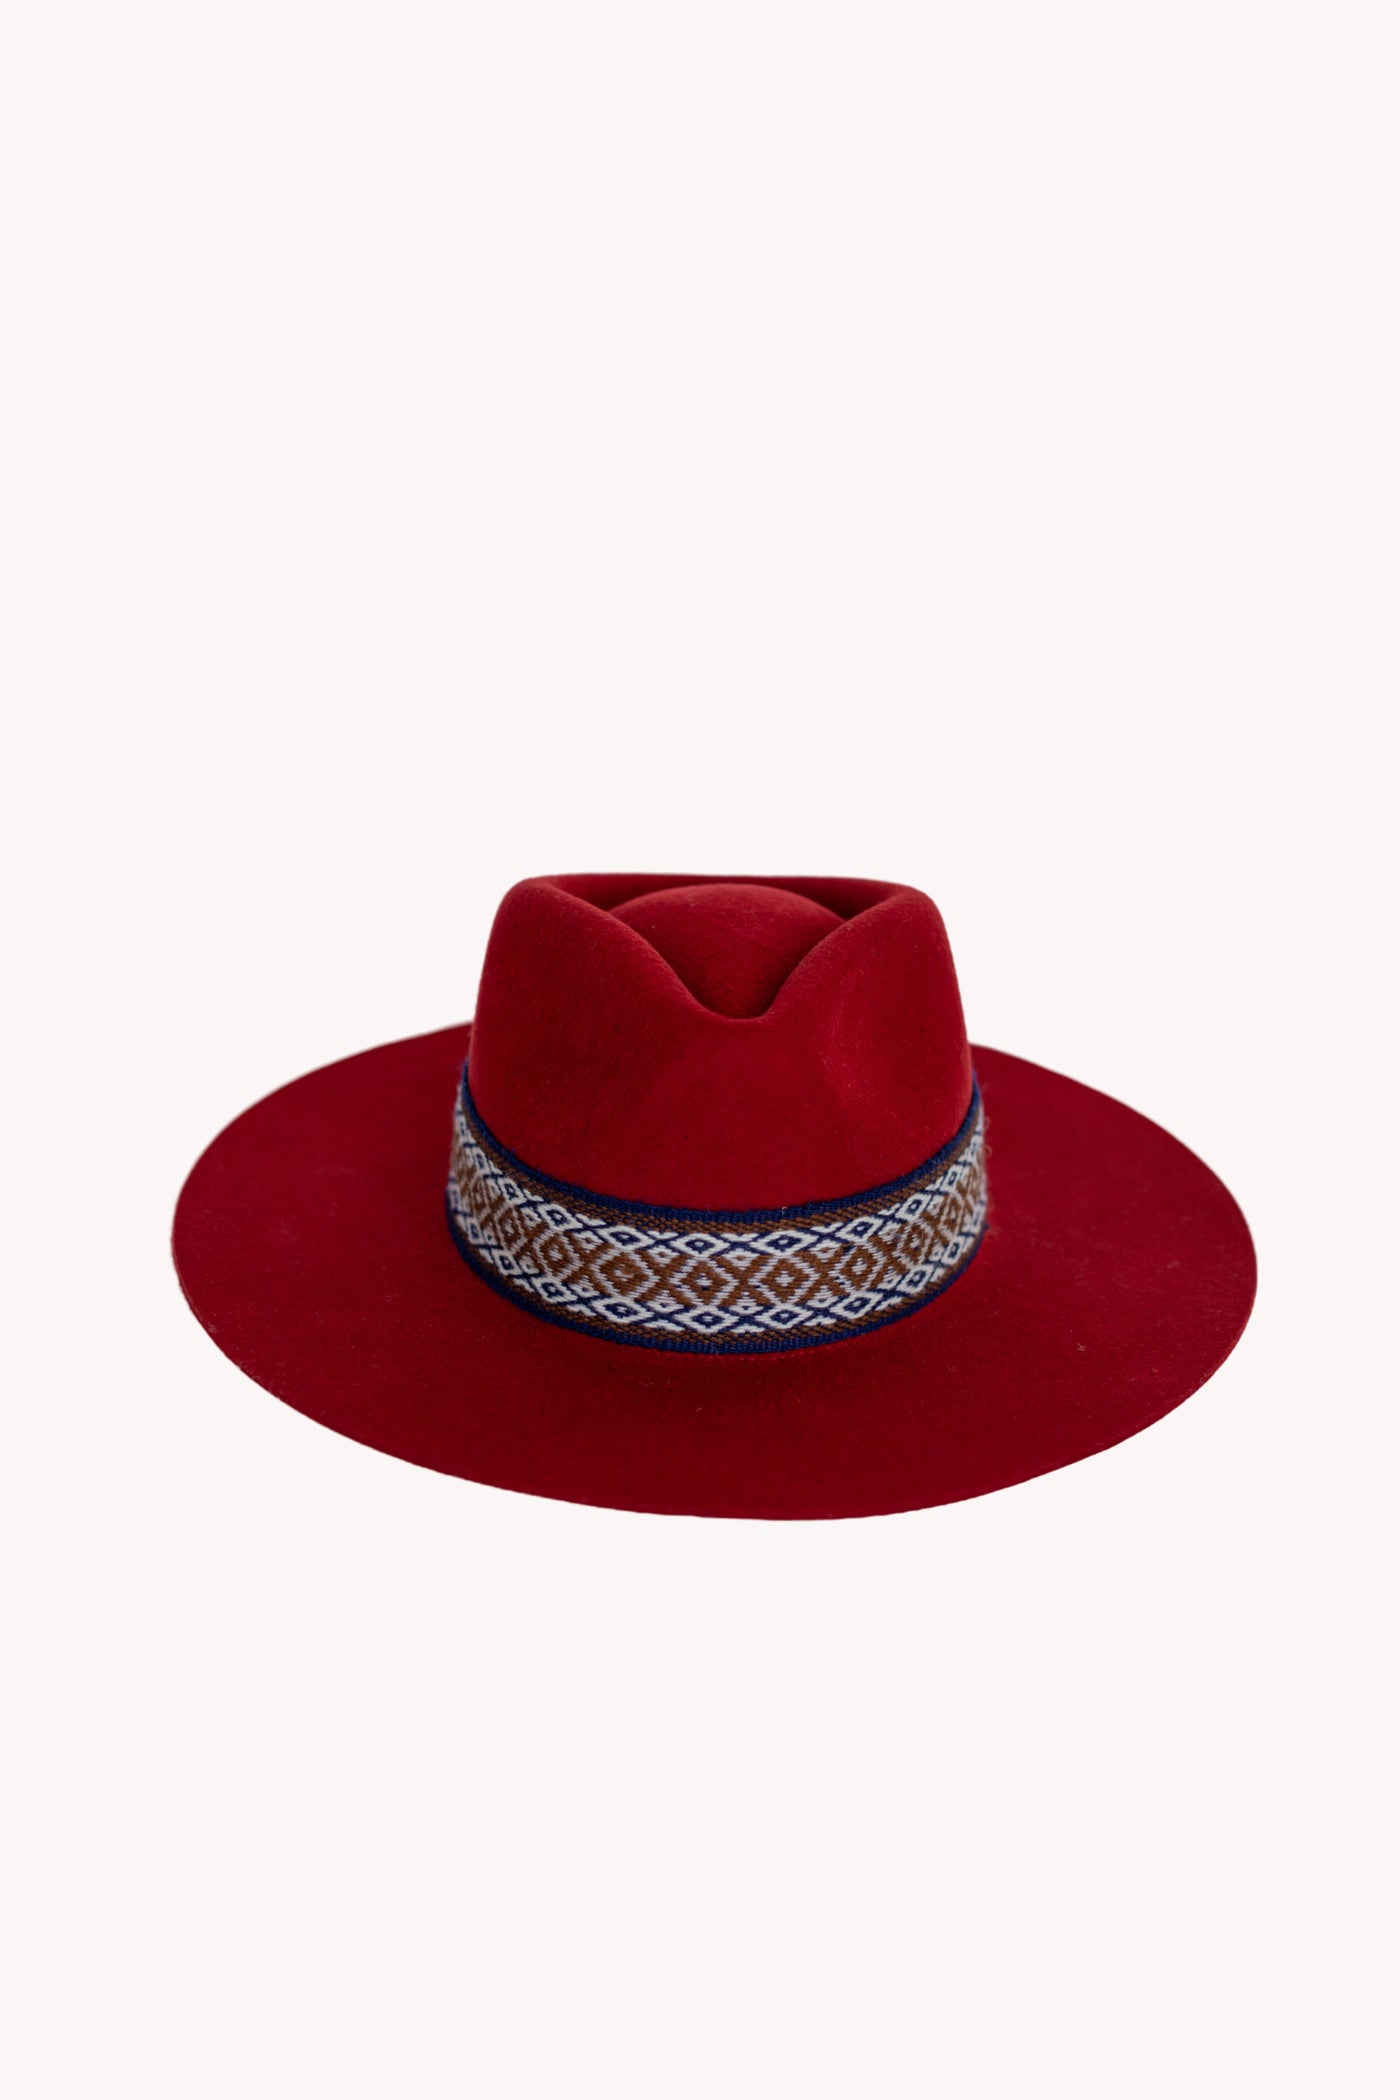 red western style bold hat